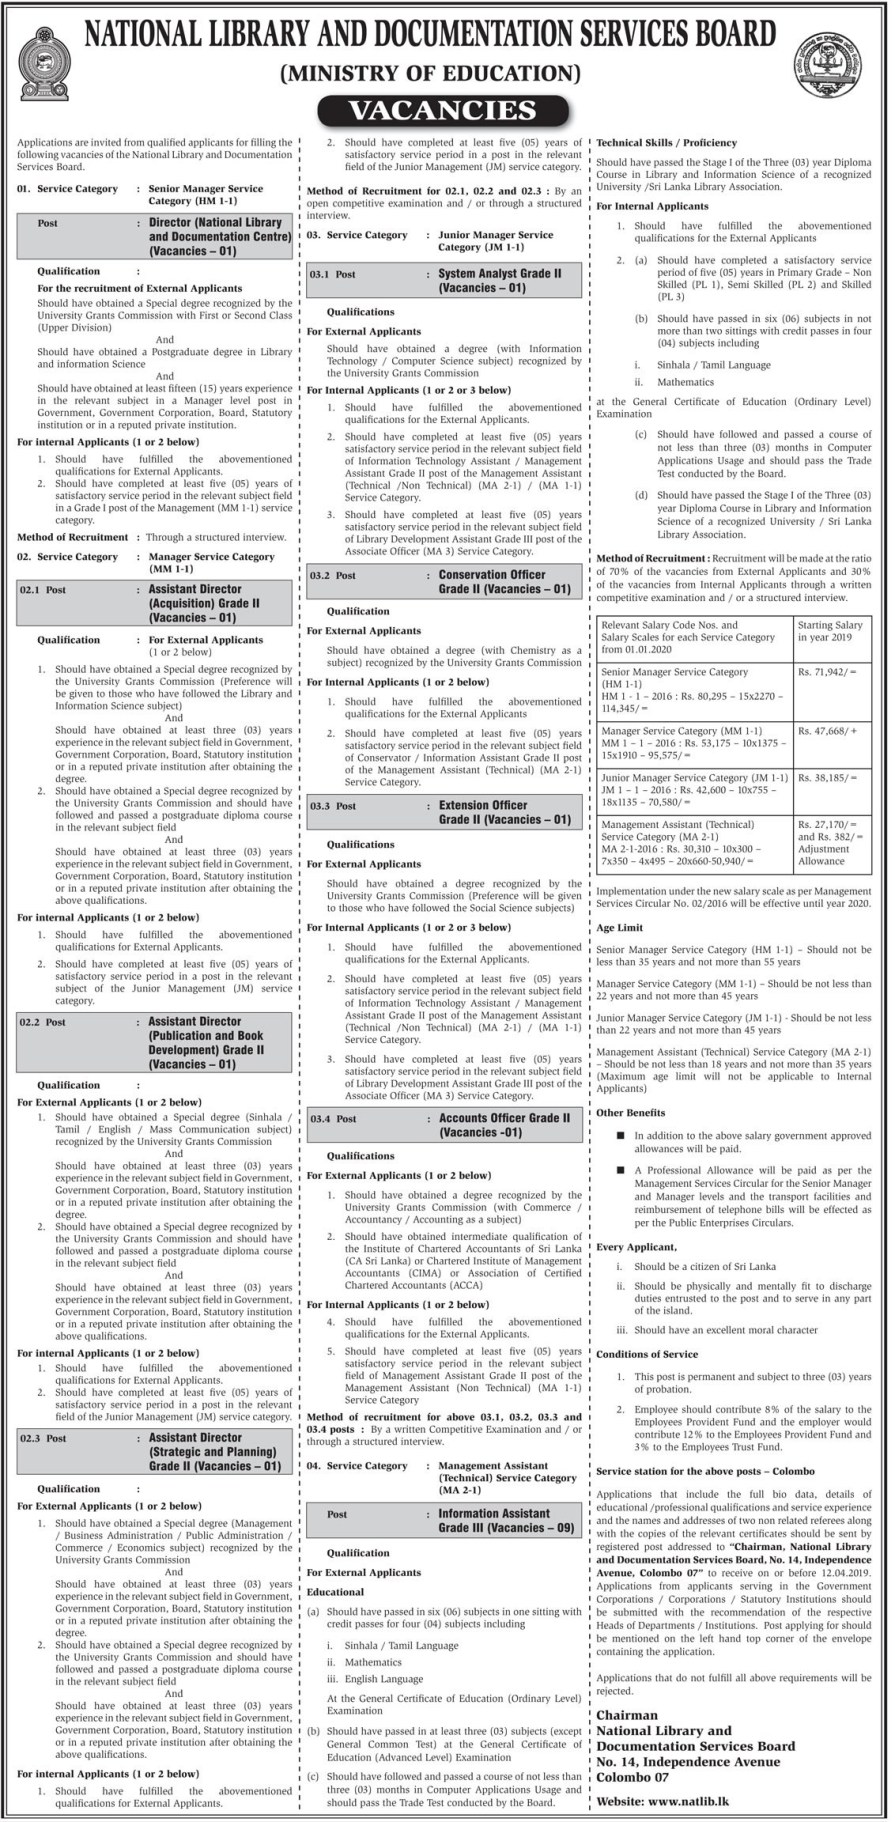 Director, Assistant Director, System Analyst, Conservation Officer, Extension Officer, Accounts Officer, Information Assistant (Grade III) 